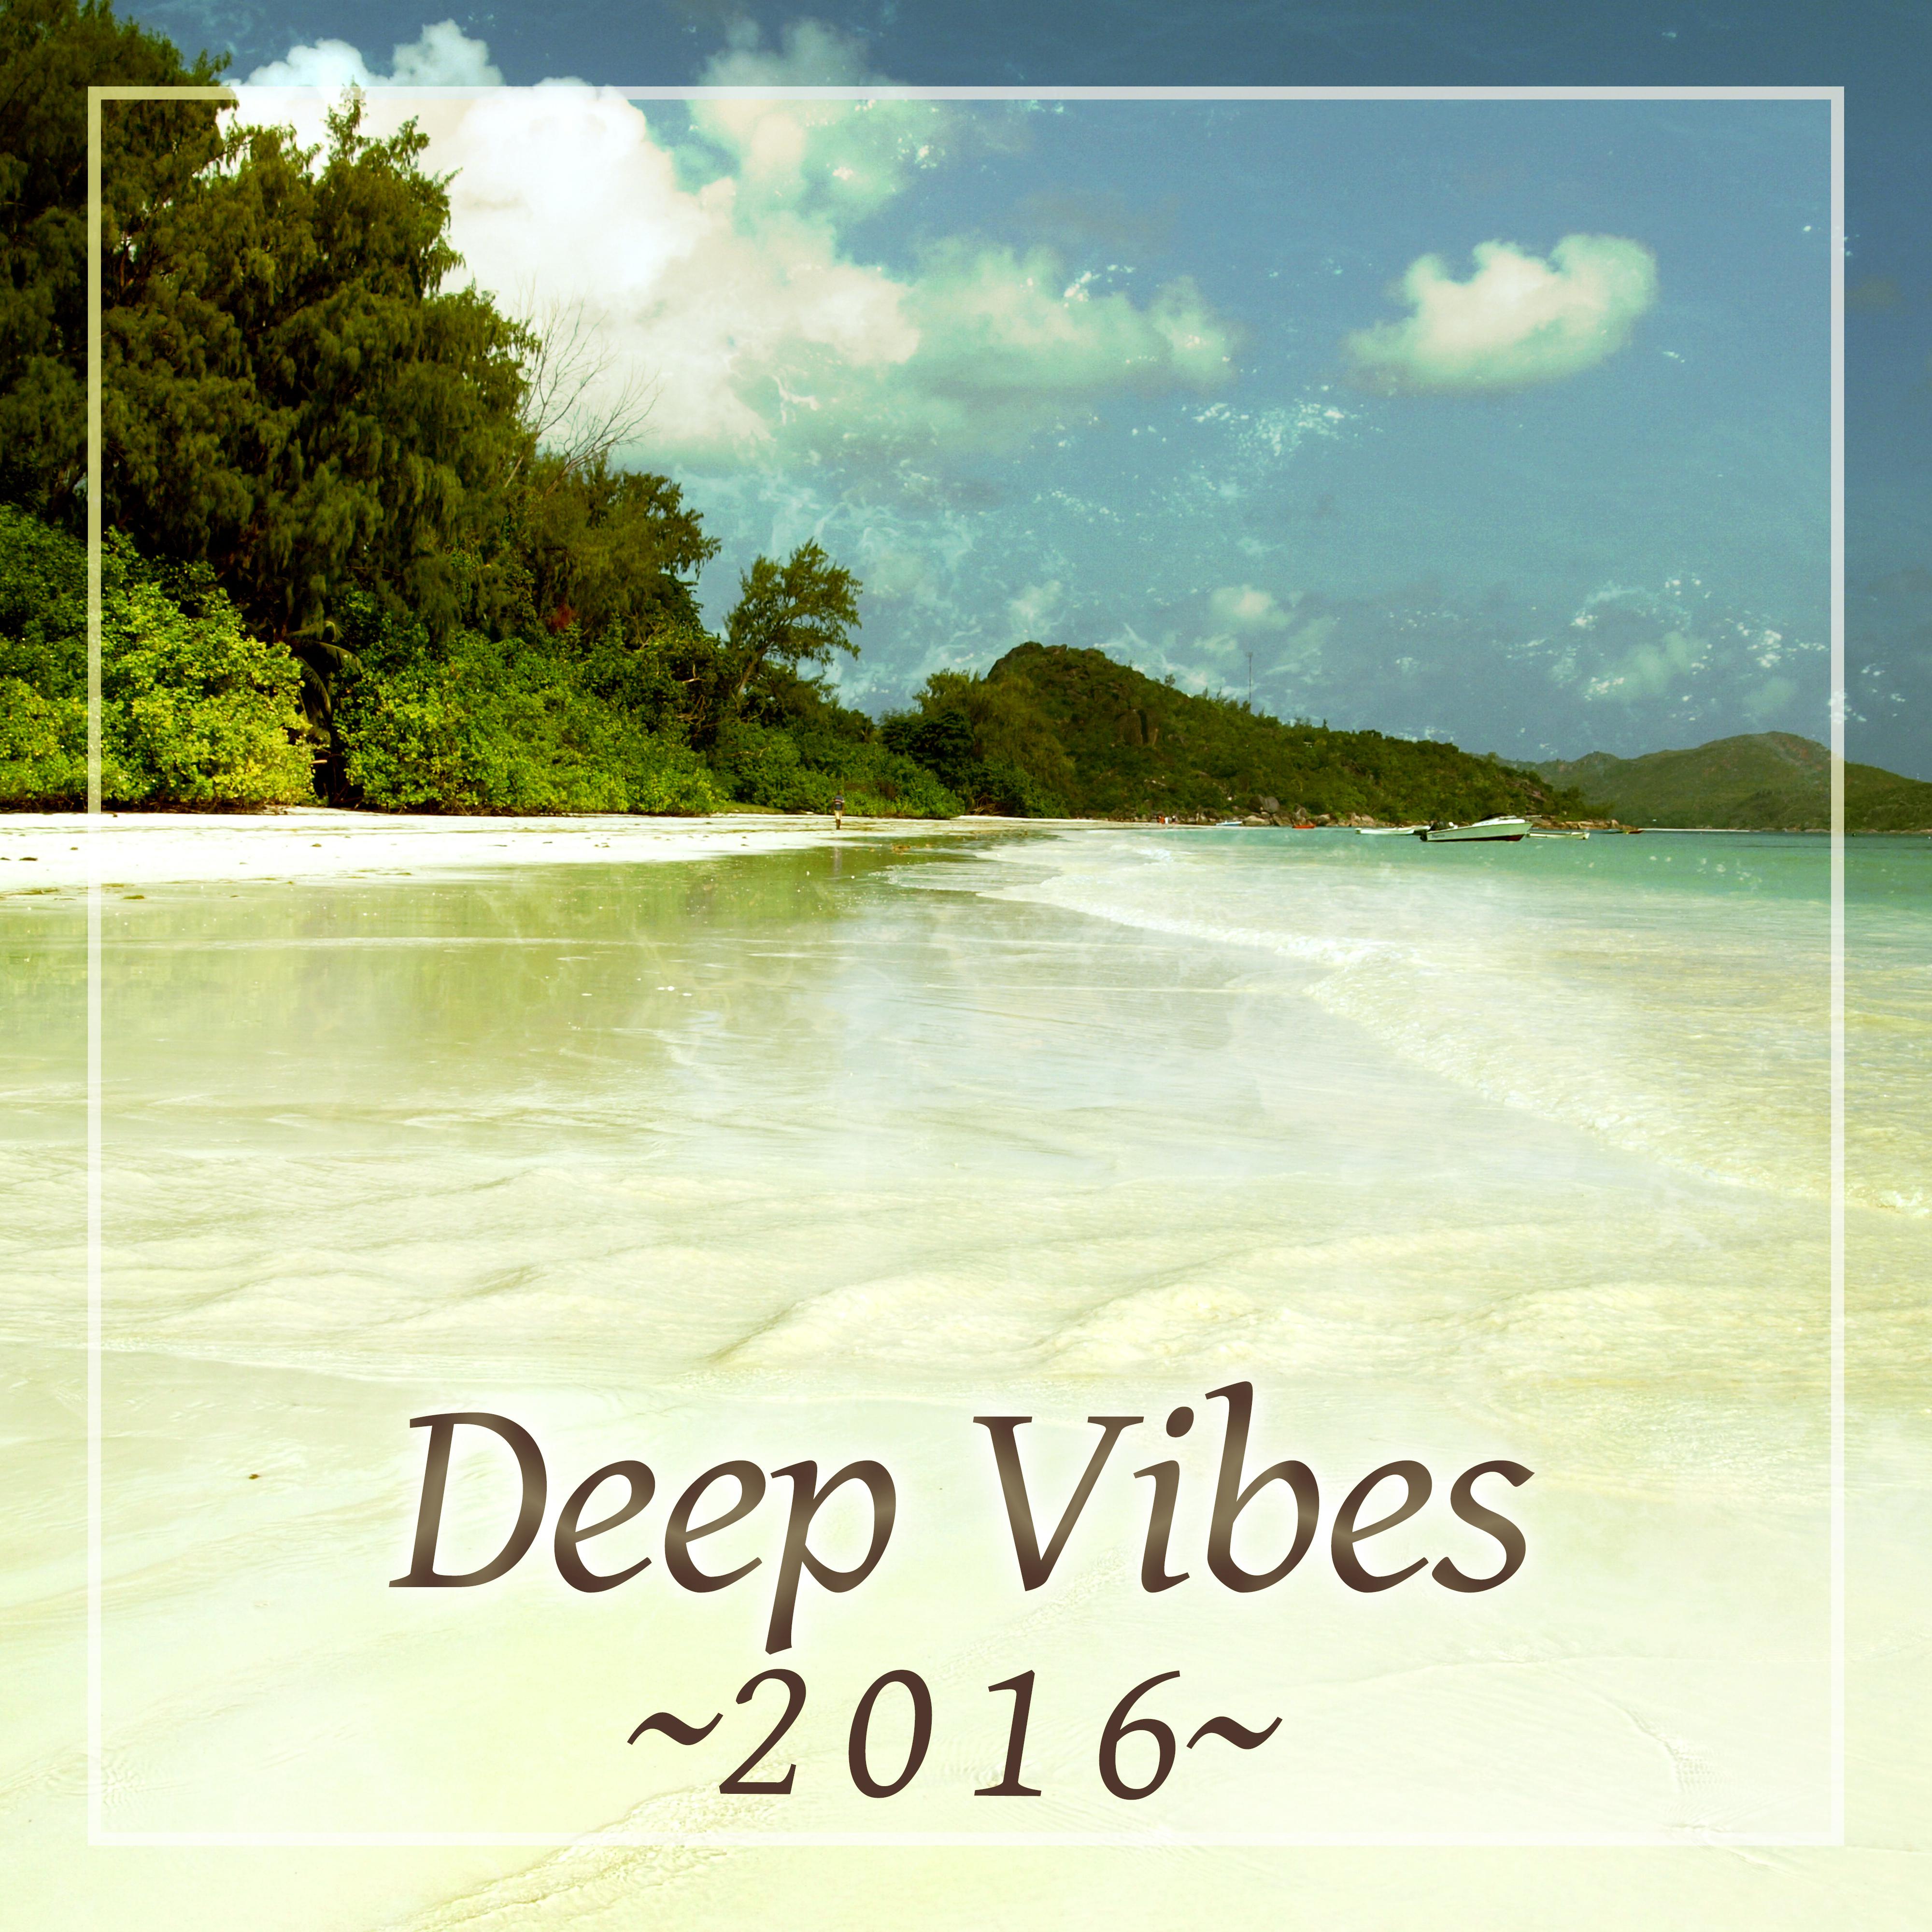 Deep Vibes 2016 – Easy Listening, Beach Music, Holiday Chill Out, Lounge Summer